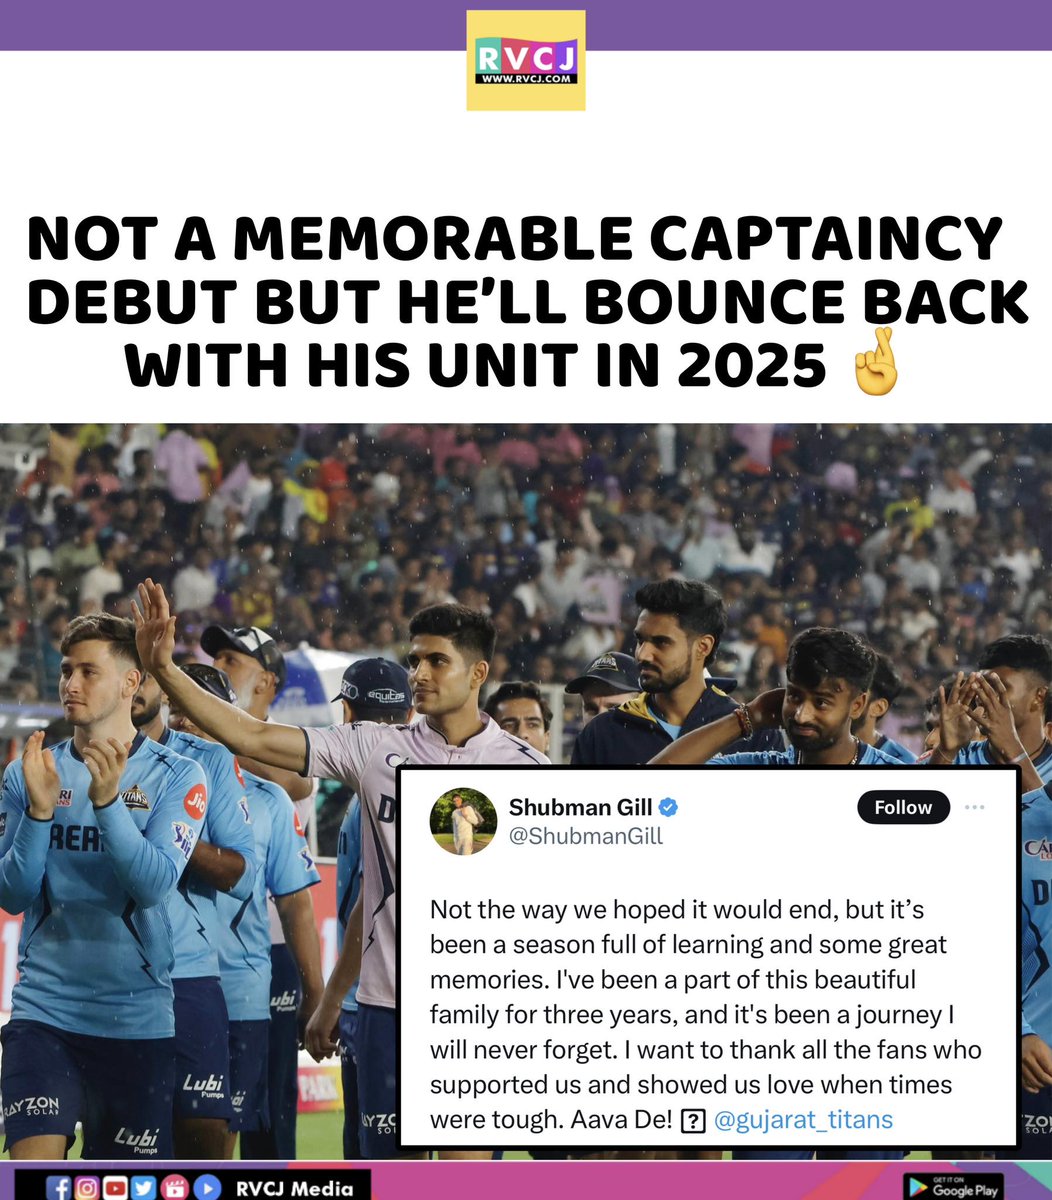 Shubman Gill posted message...